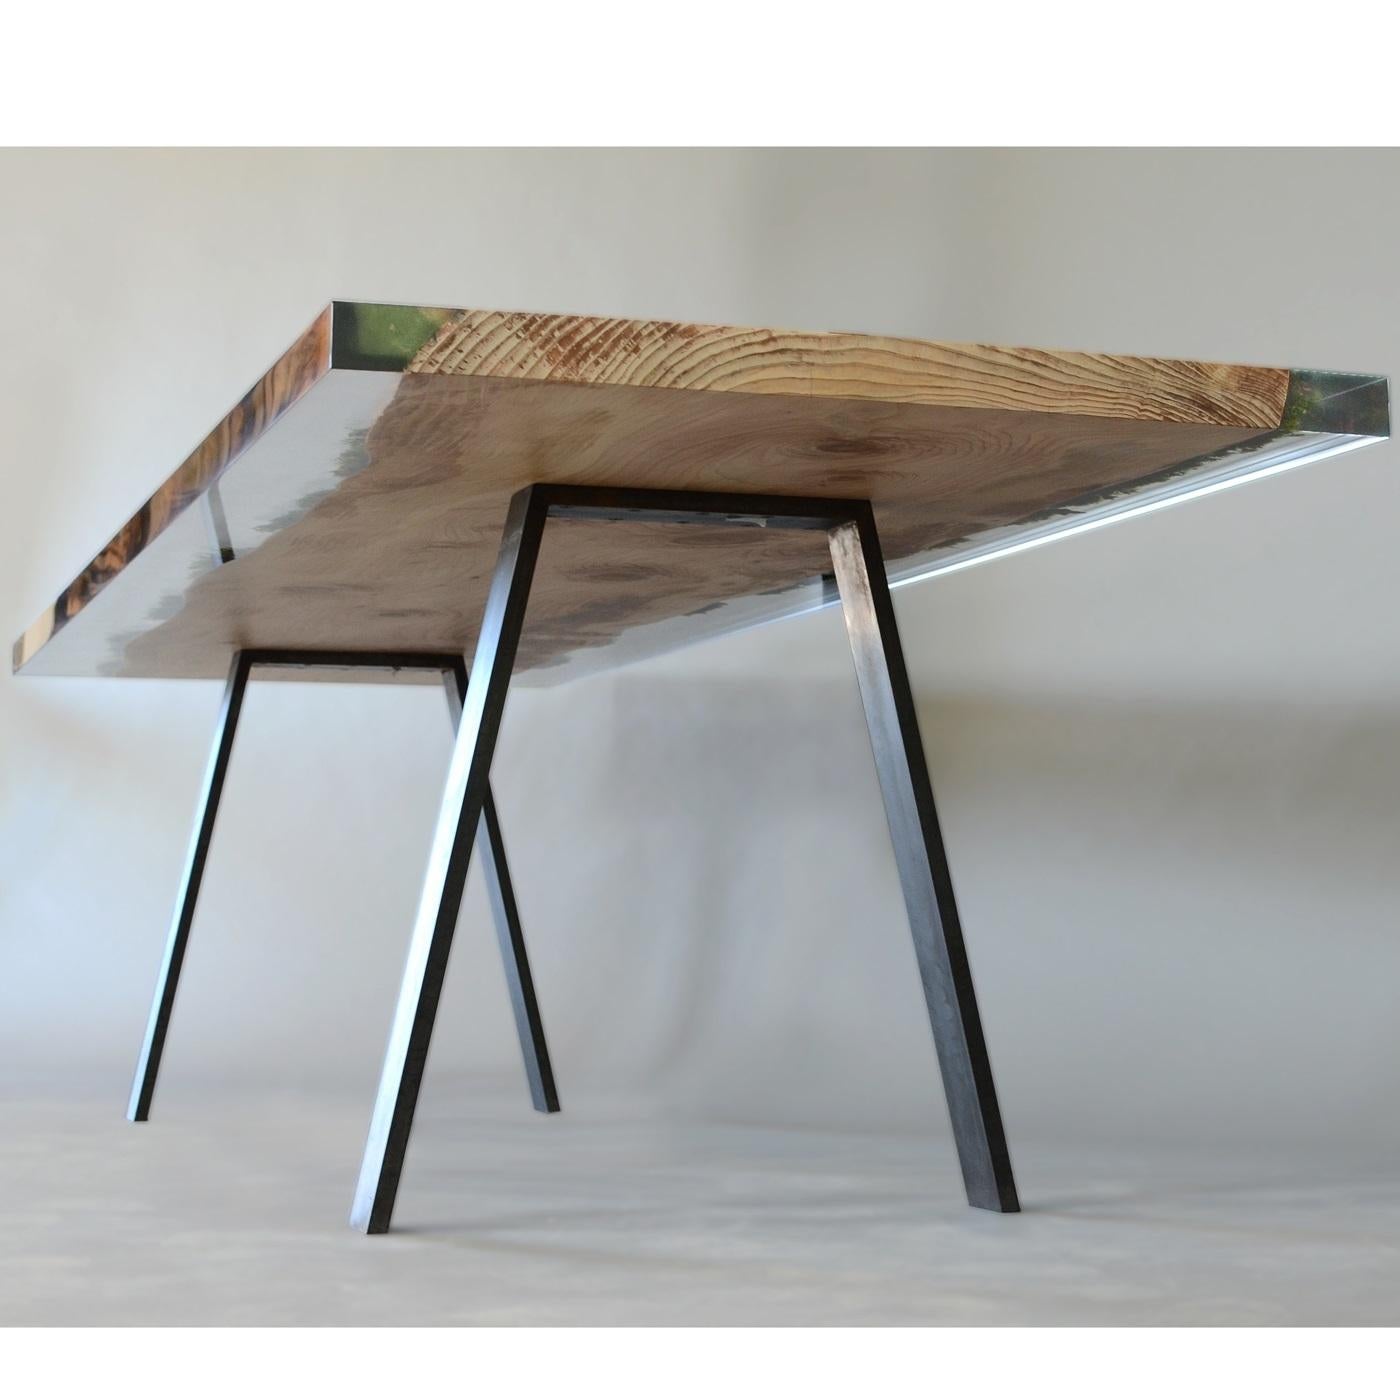 Italian Moss Limited Edition Table